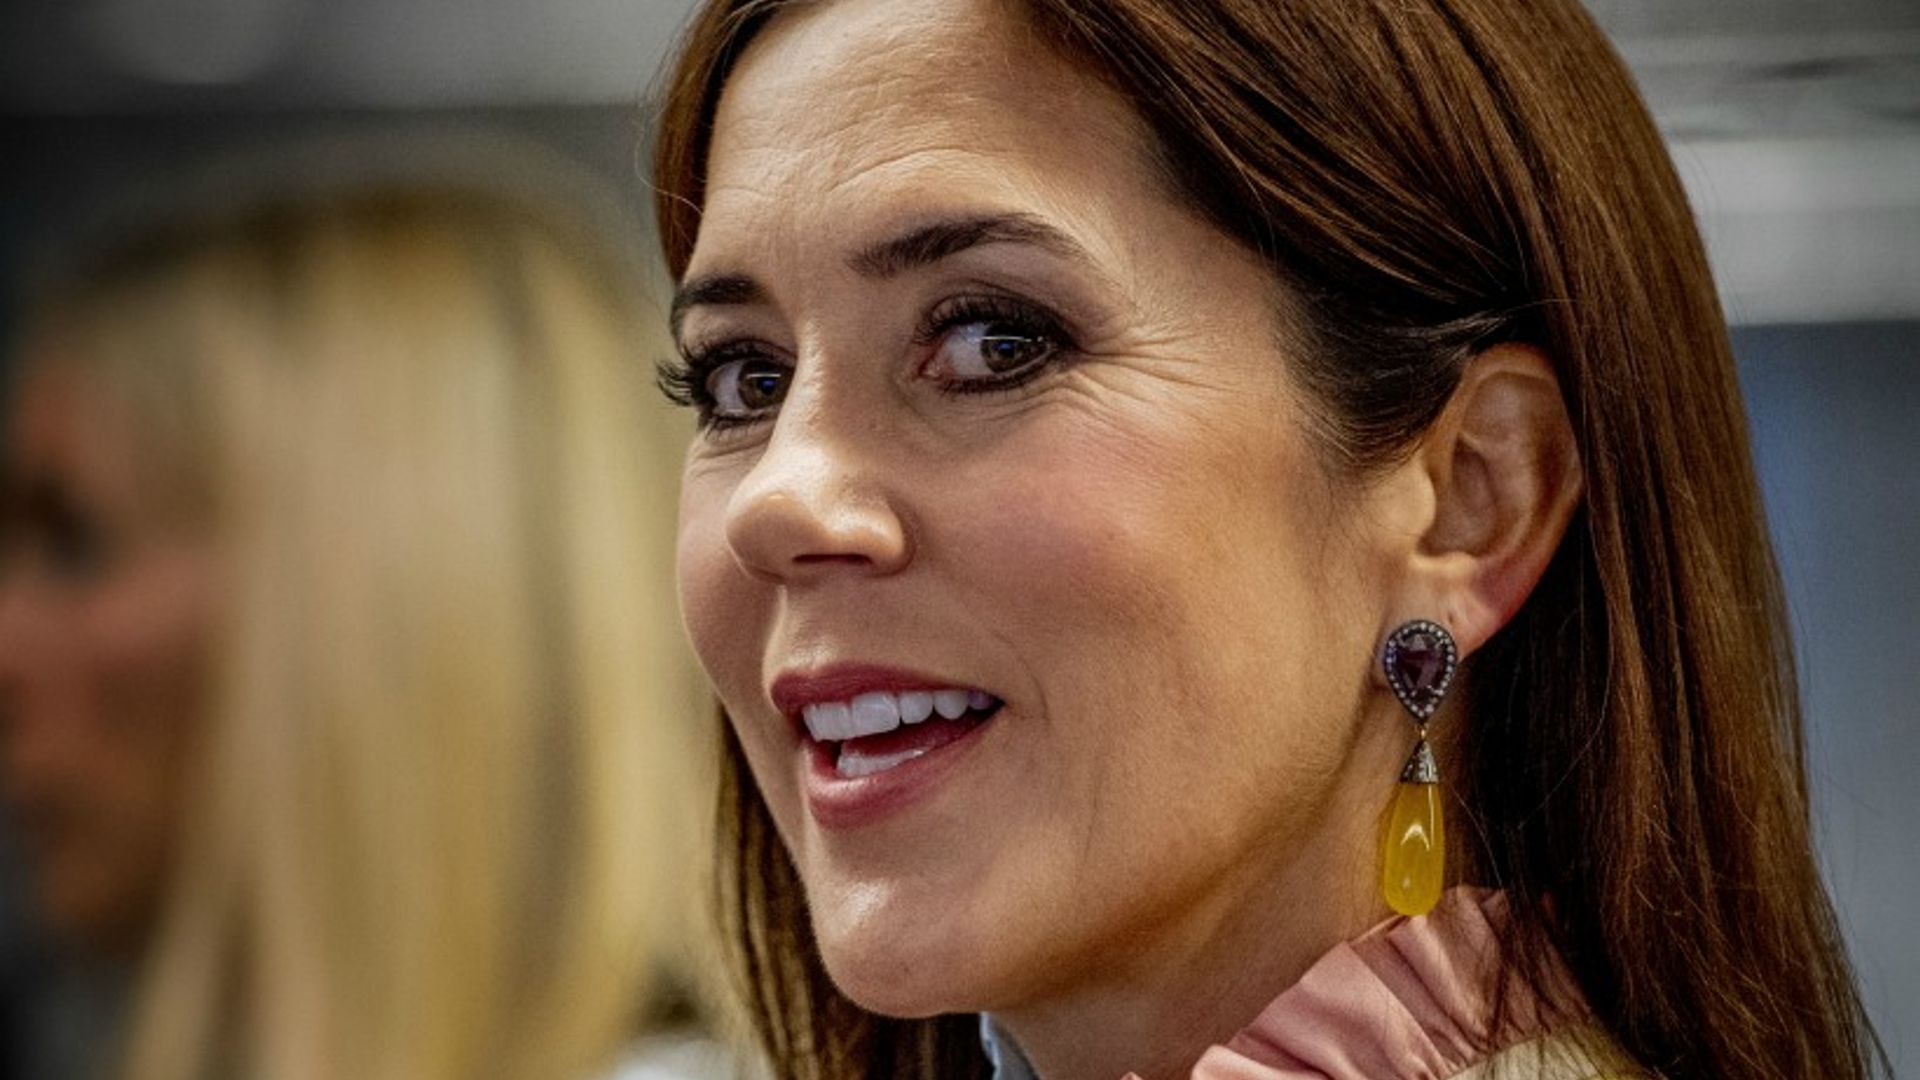 Princess Mary of Denmark steps out in eye-catching '70s-inspired blouse